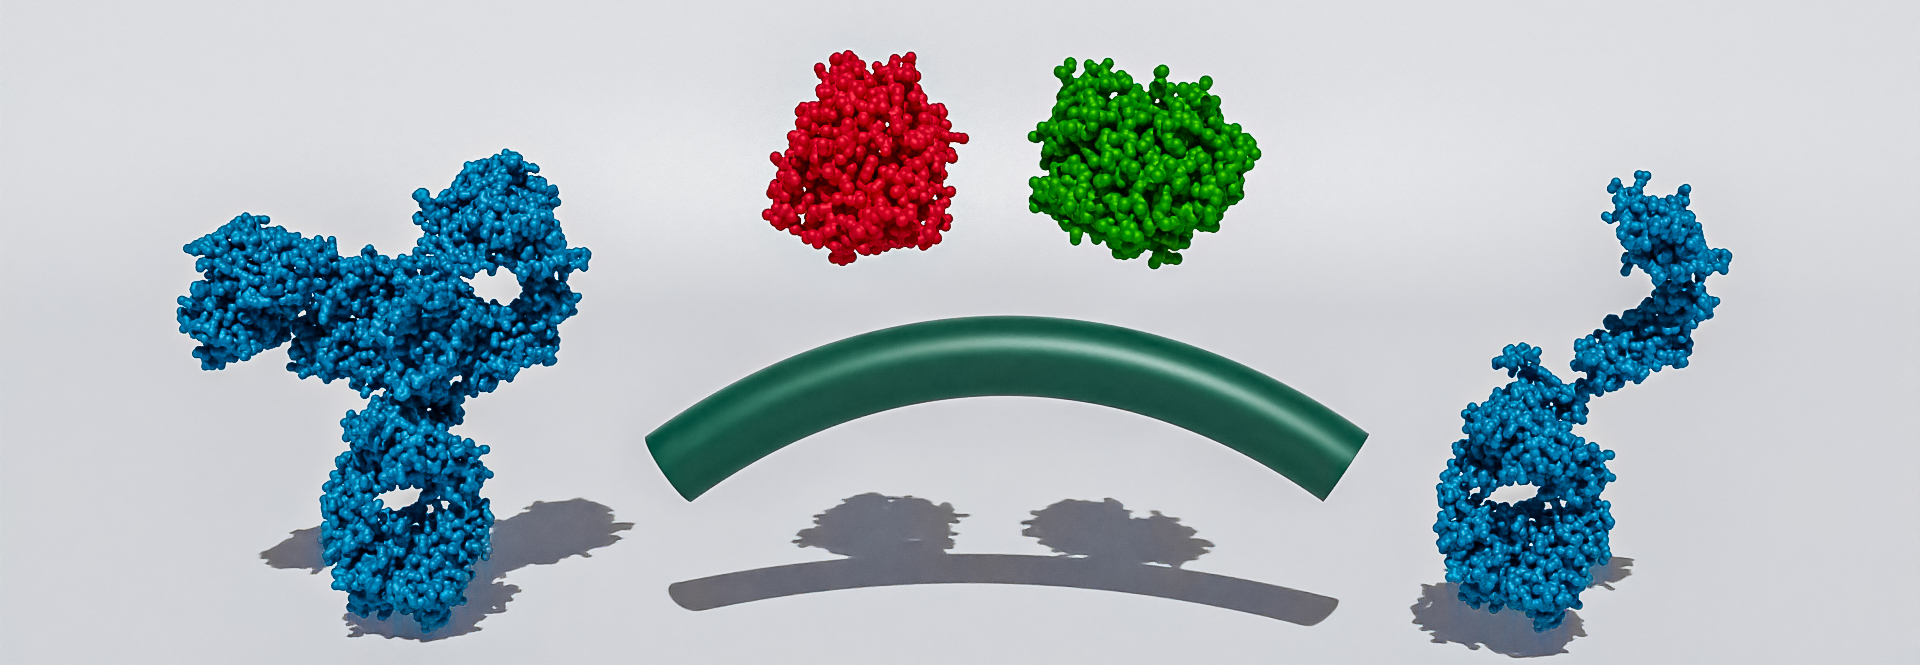 Enzyme characterization_ 3D Render of different enzymes